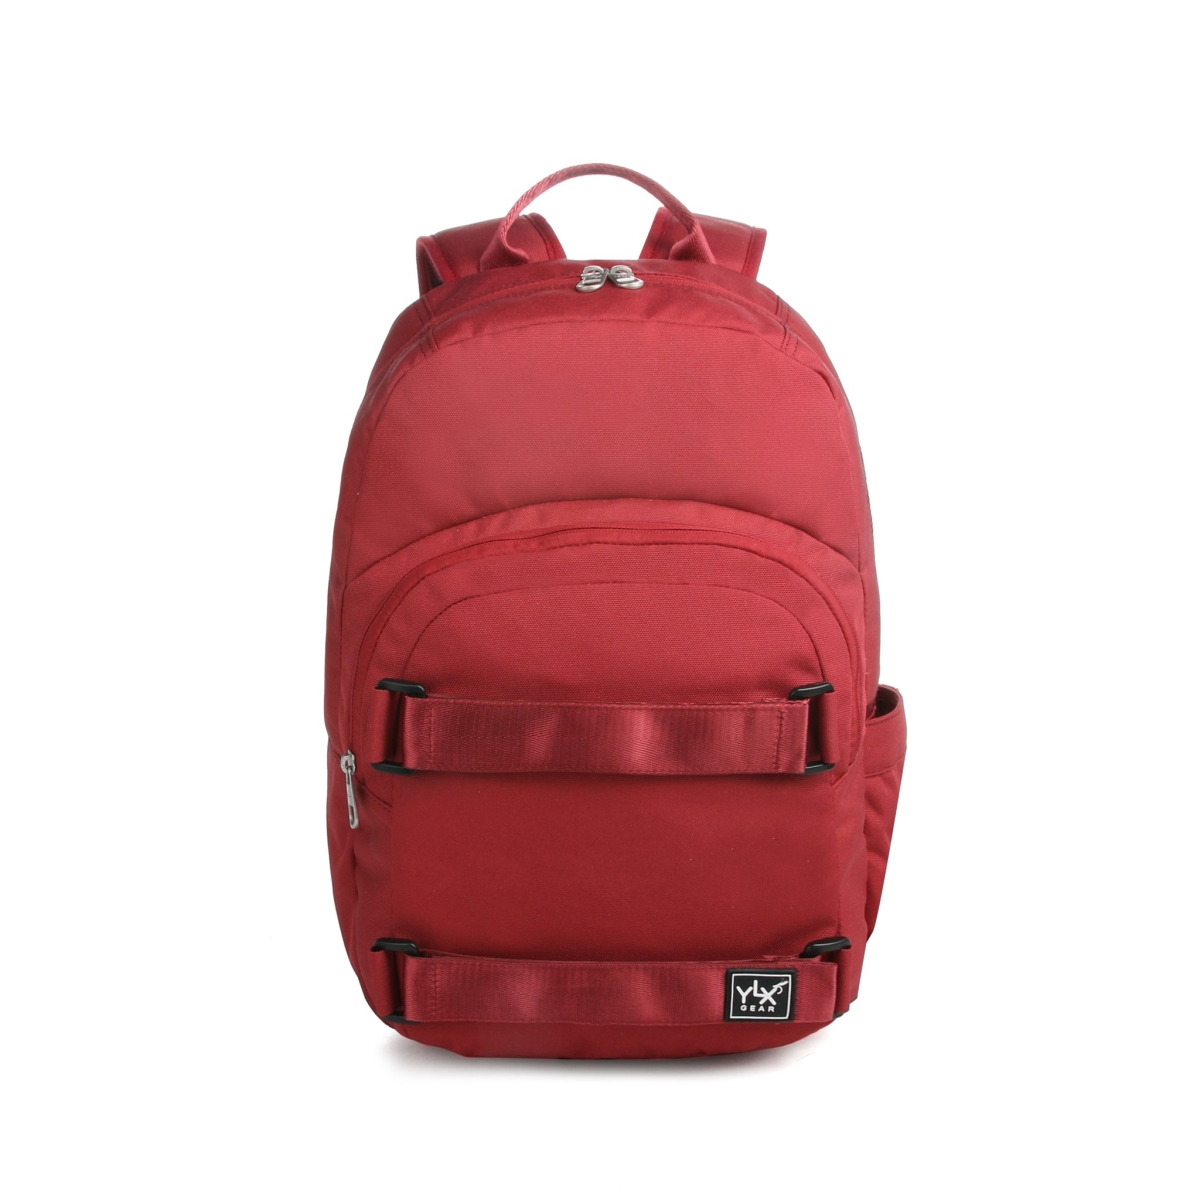 YLX Aster Backpack | Brick Red